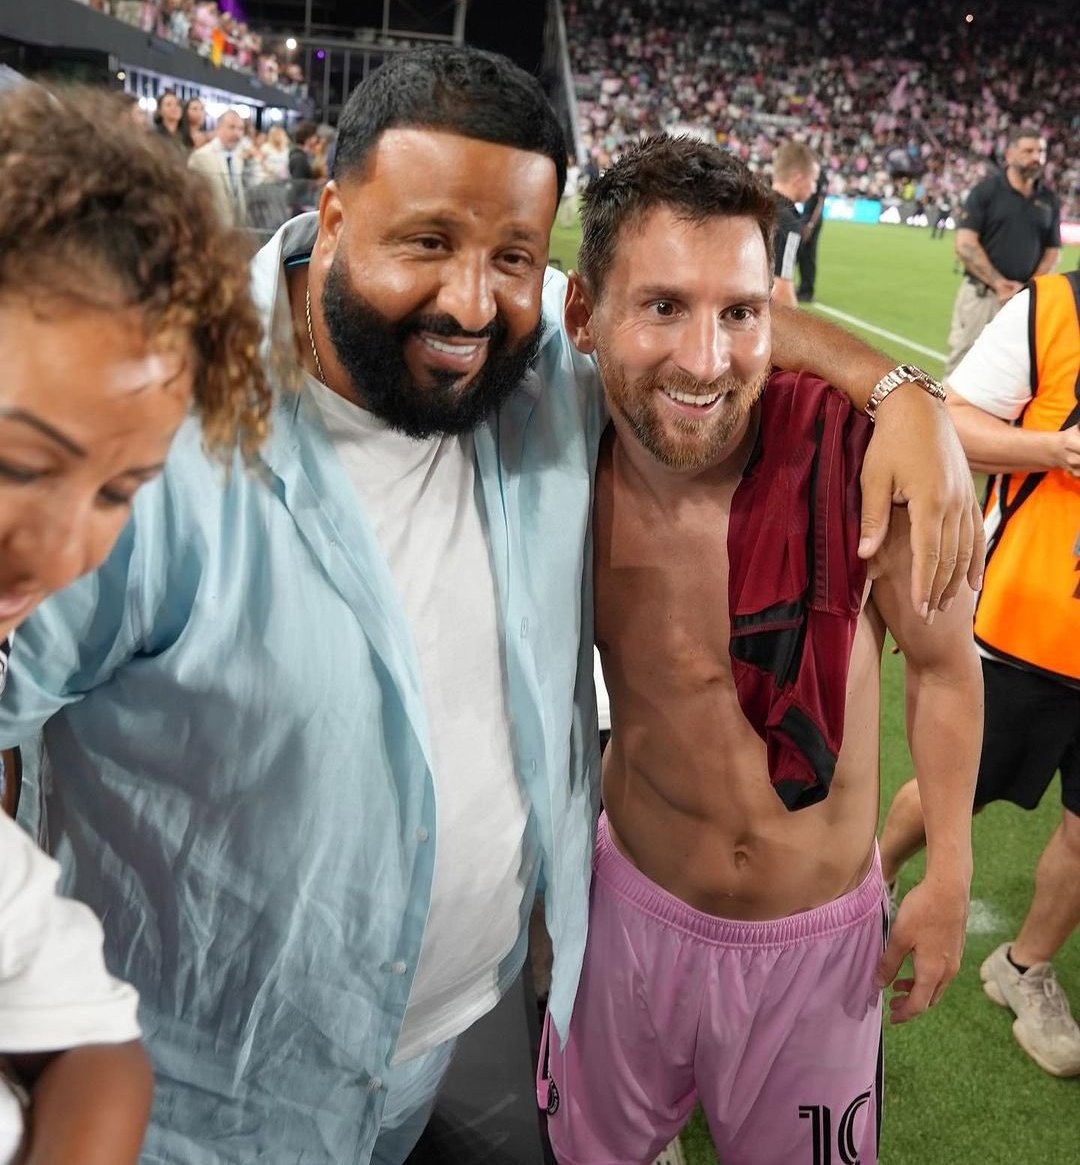 Pulse Sports Nigeria on X: " Lionel Messi comforted DJ Khaled's son who  was crying before the match and after the match the Argentine linked up  with DJ Khaled himself. Is there